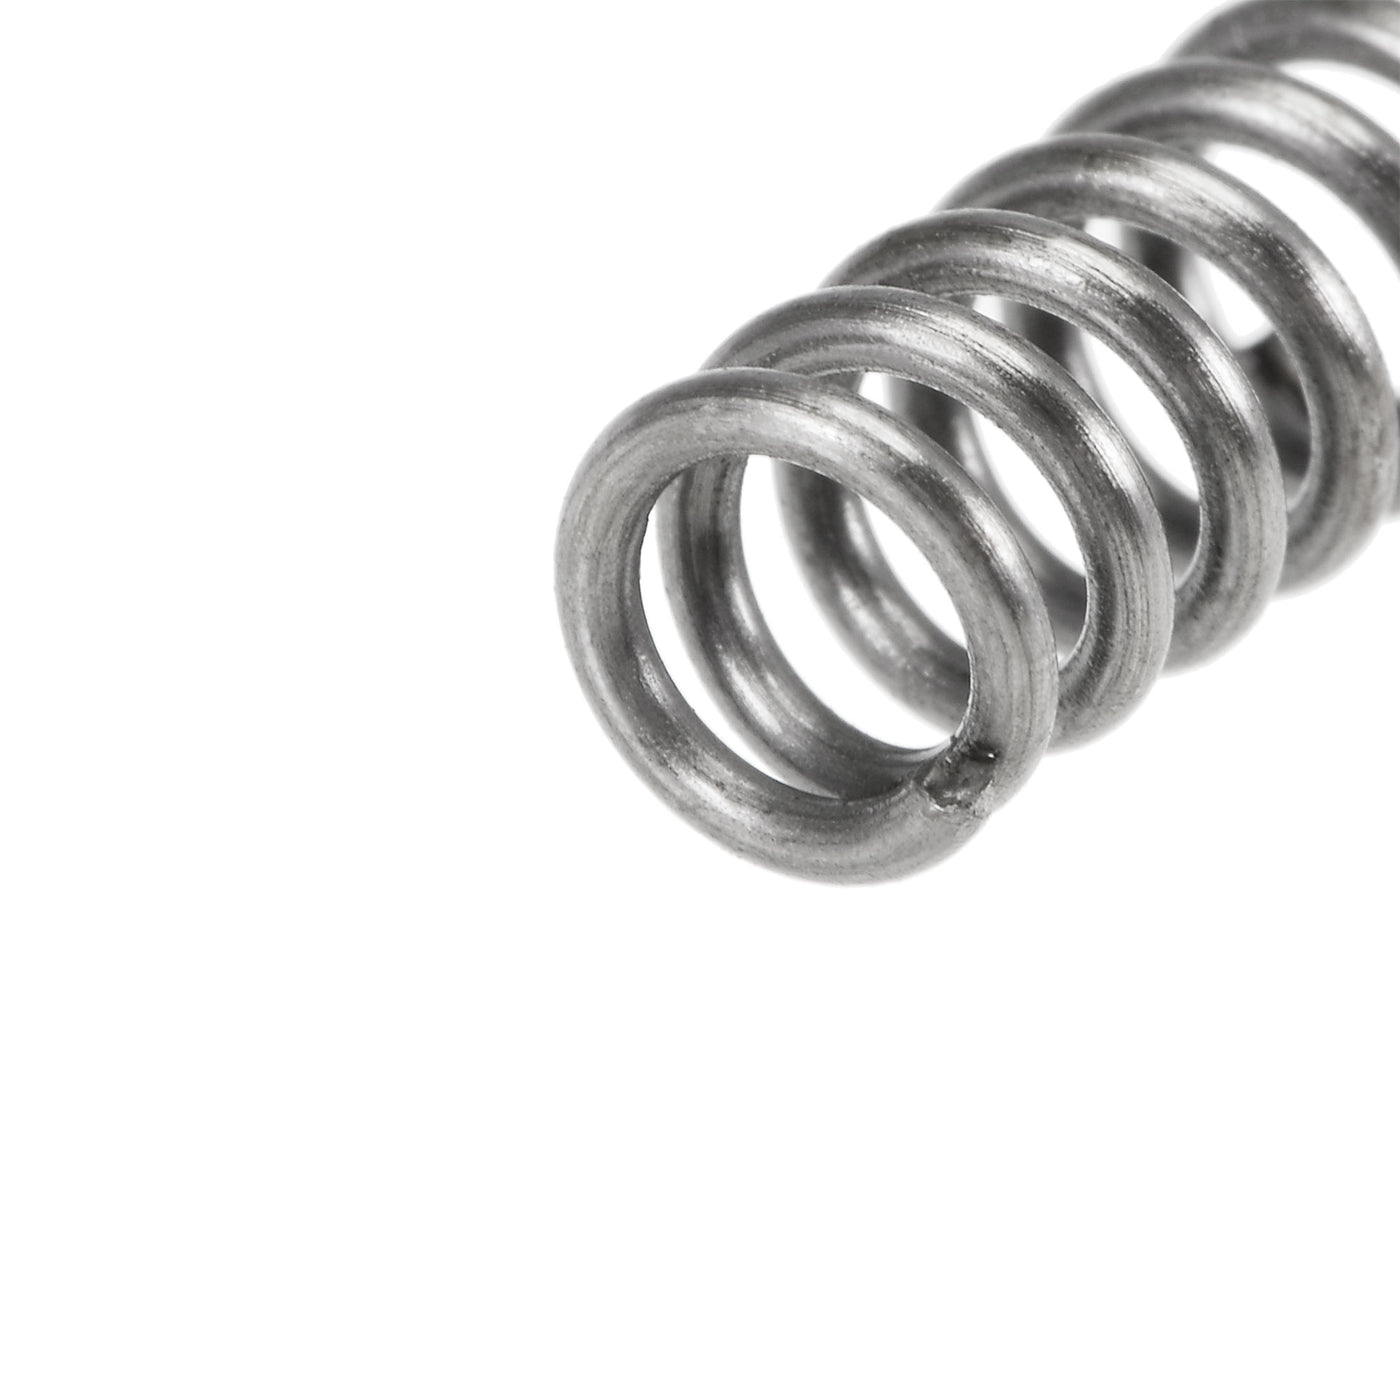 uxcell Uxcell Compressed Spring,5mmx0.8mmx10mm Free Length,35.3N Load Capacity,Gray,20pcs